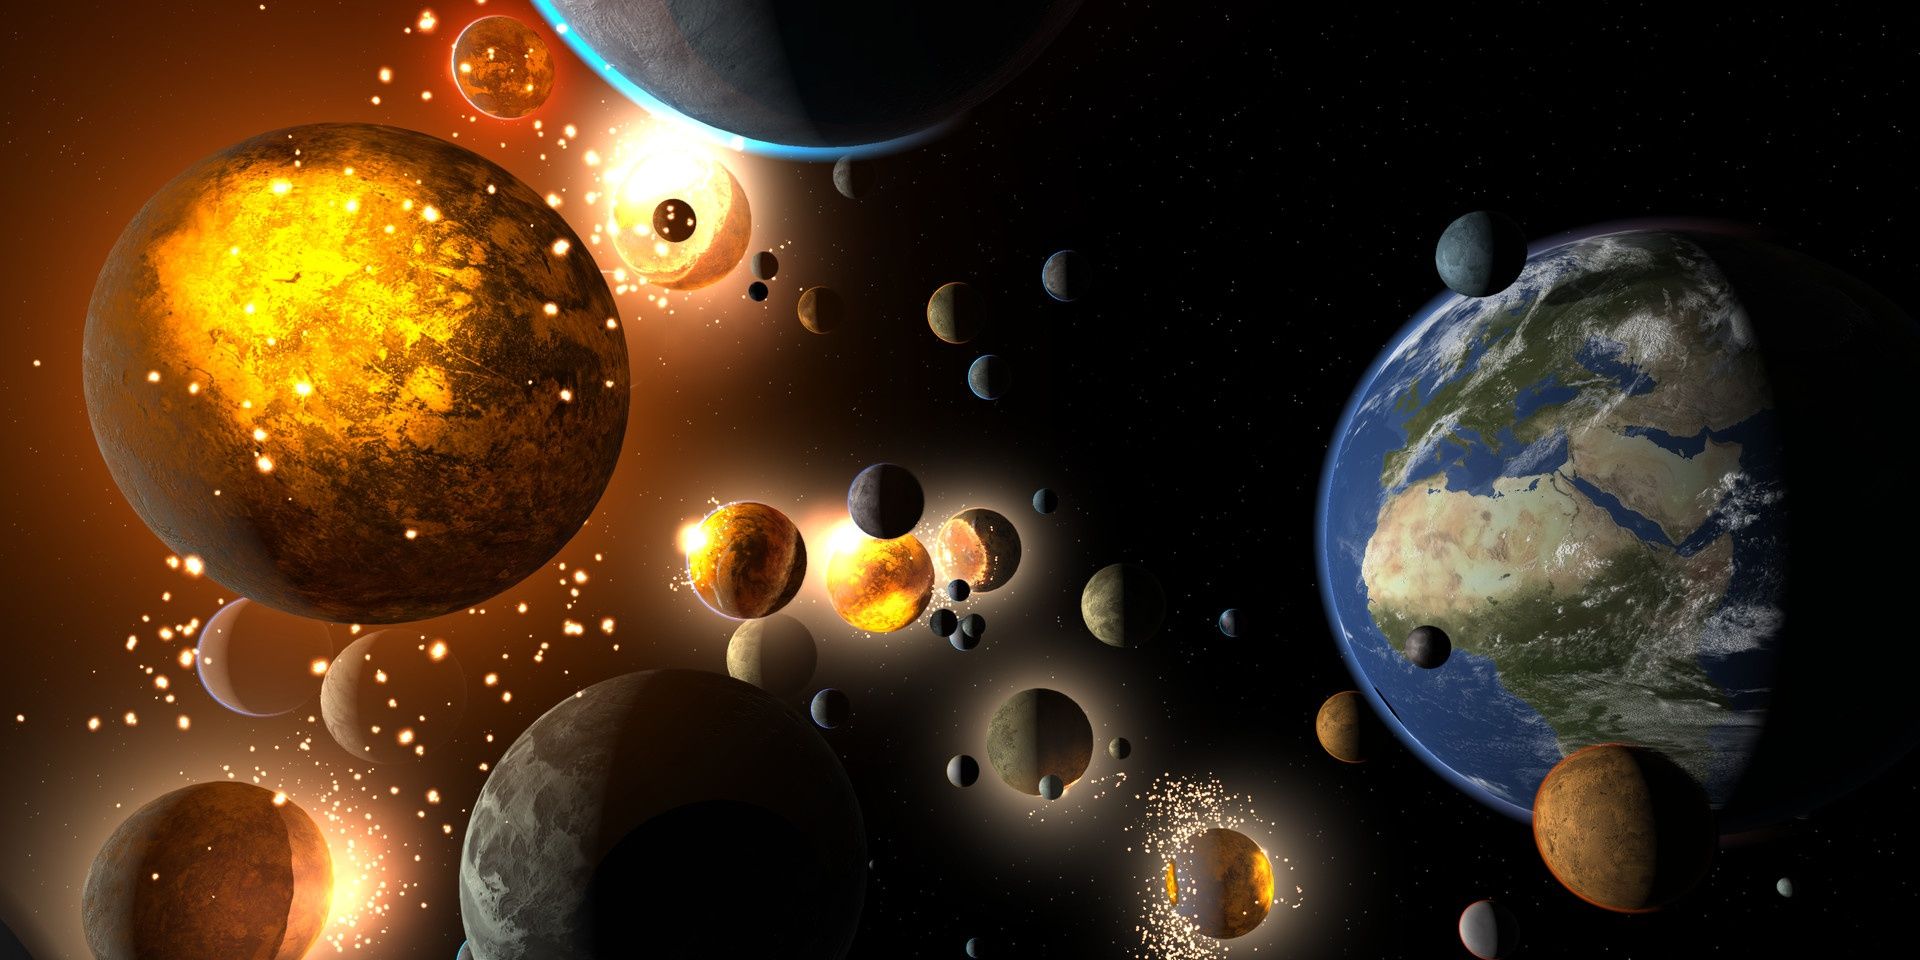 hundreds of planets are scattered throughout space, many of them are exploding, Earth can be seen on the right.